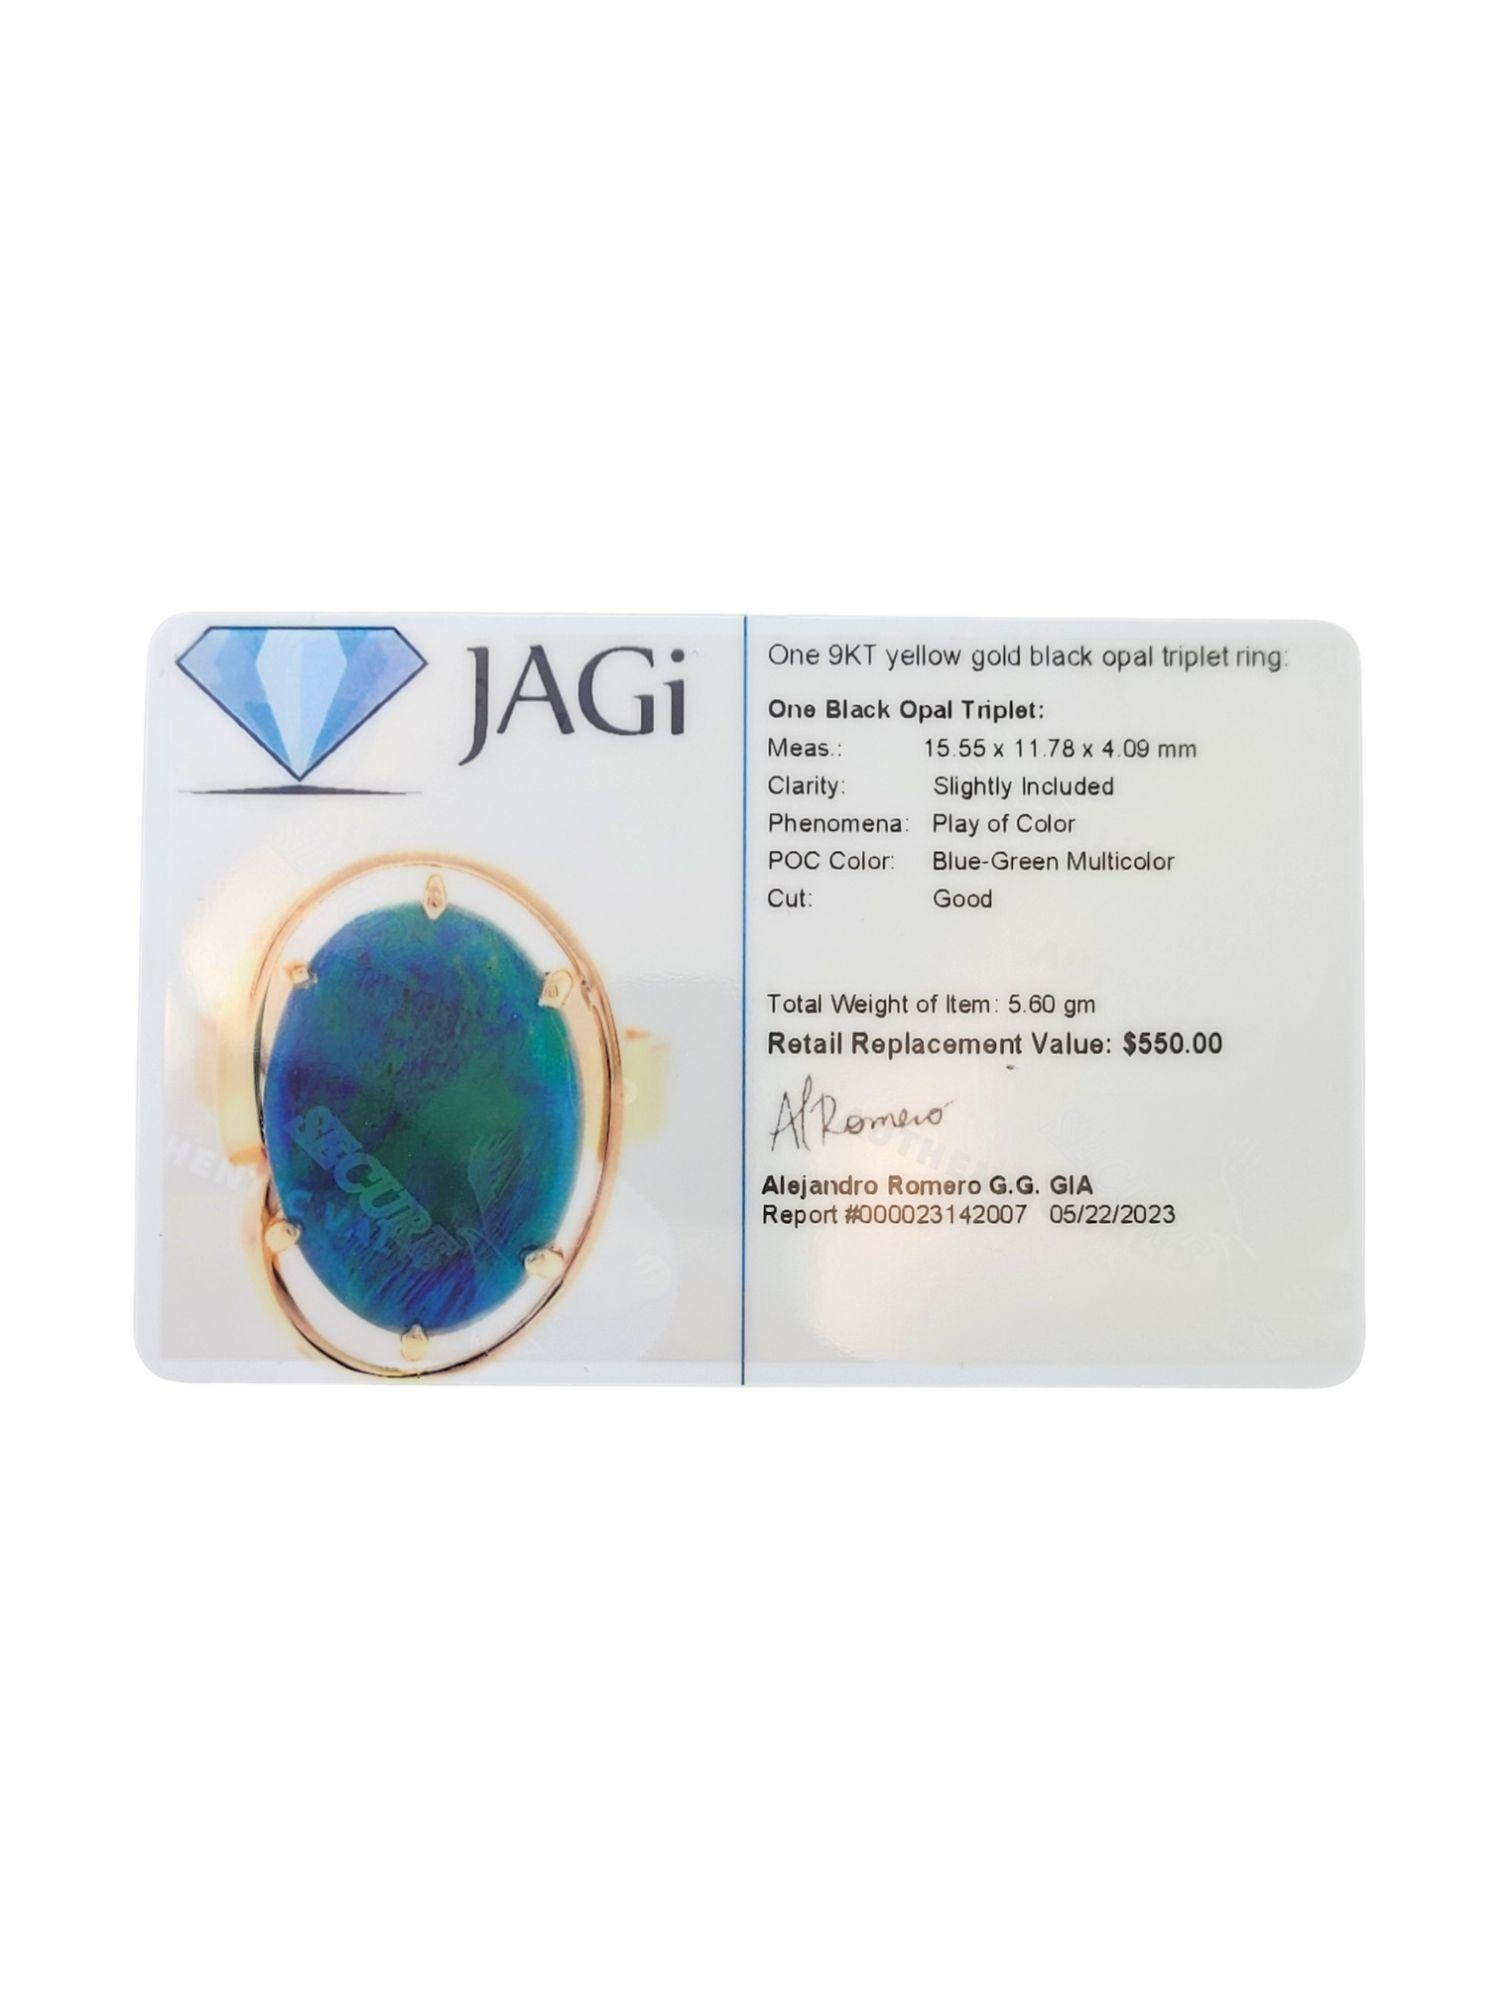 9K Yellow Gold Black Opal Ring Size 6.25-6.5 #14772 For Sale 4